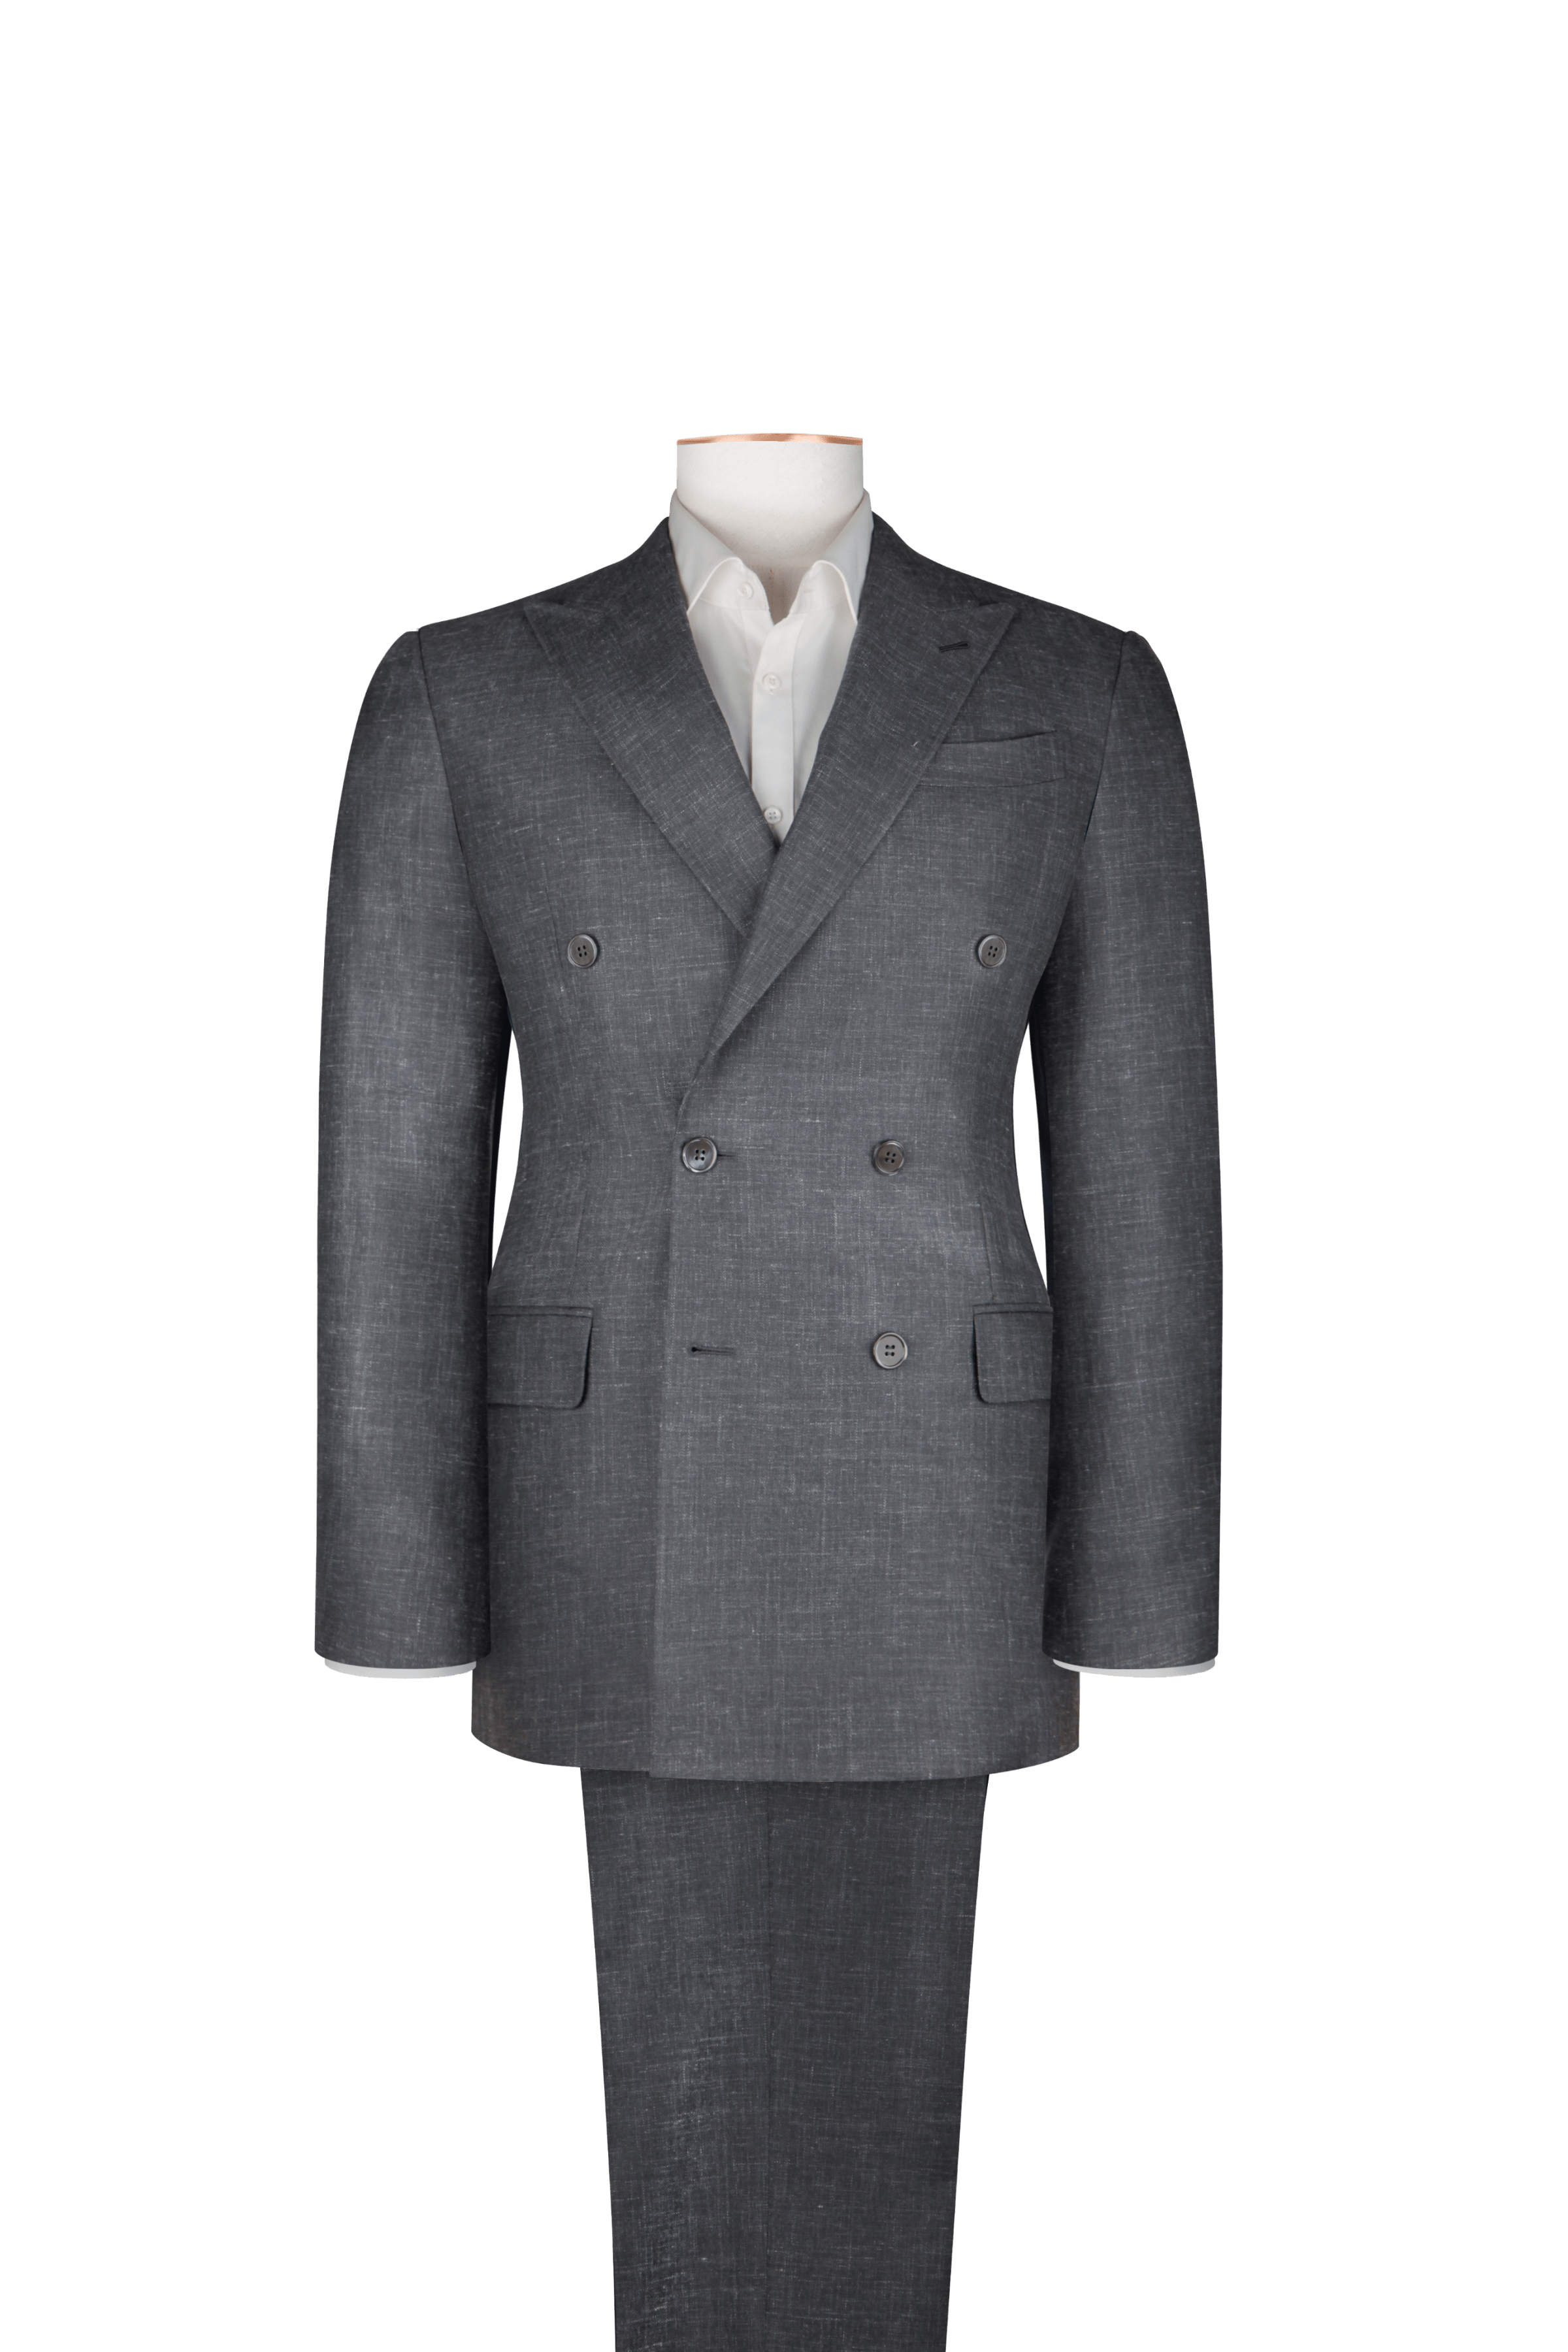 Knot Standard Classic Grey Summer Suit by Knot Standard